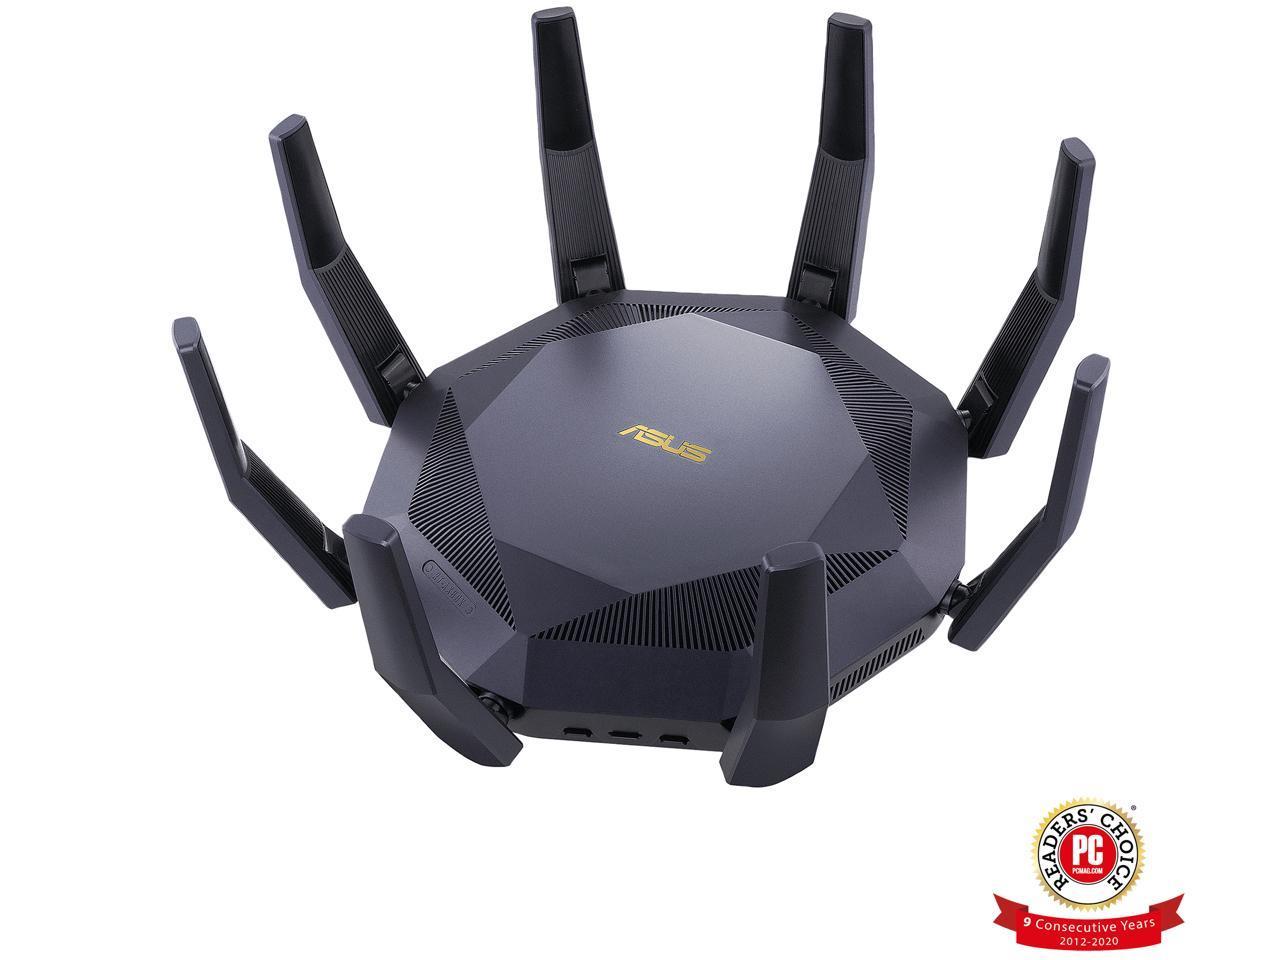 ASUS RT-AX89X AX6000 Dual Band Gigabit WiFi 6 Router for $359.99 Shipped